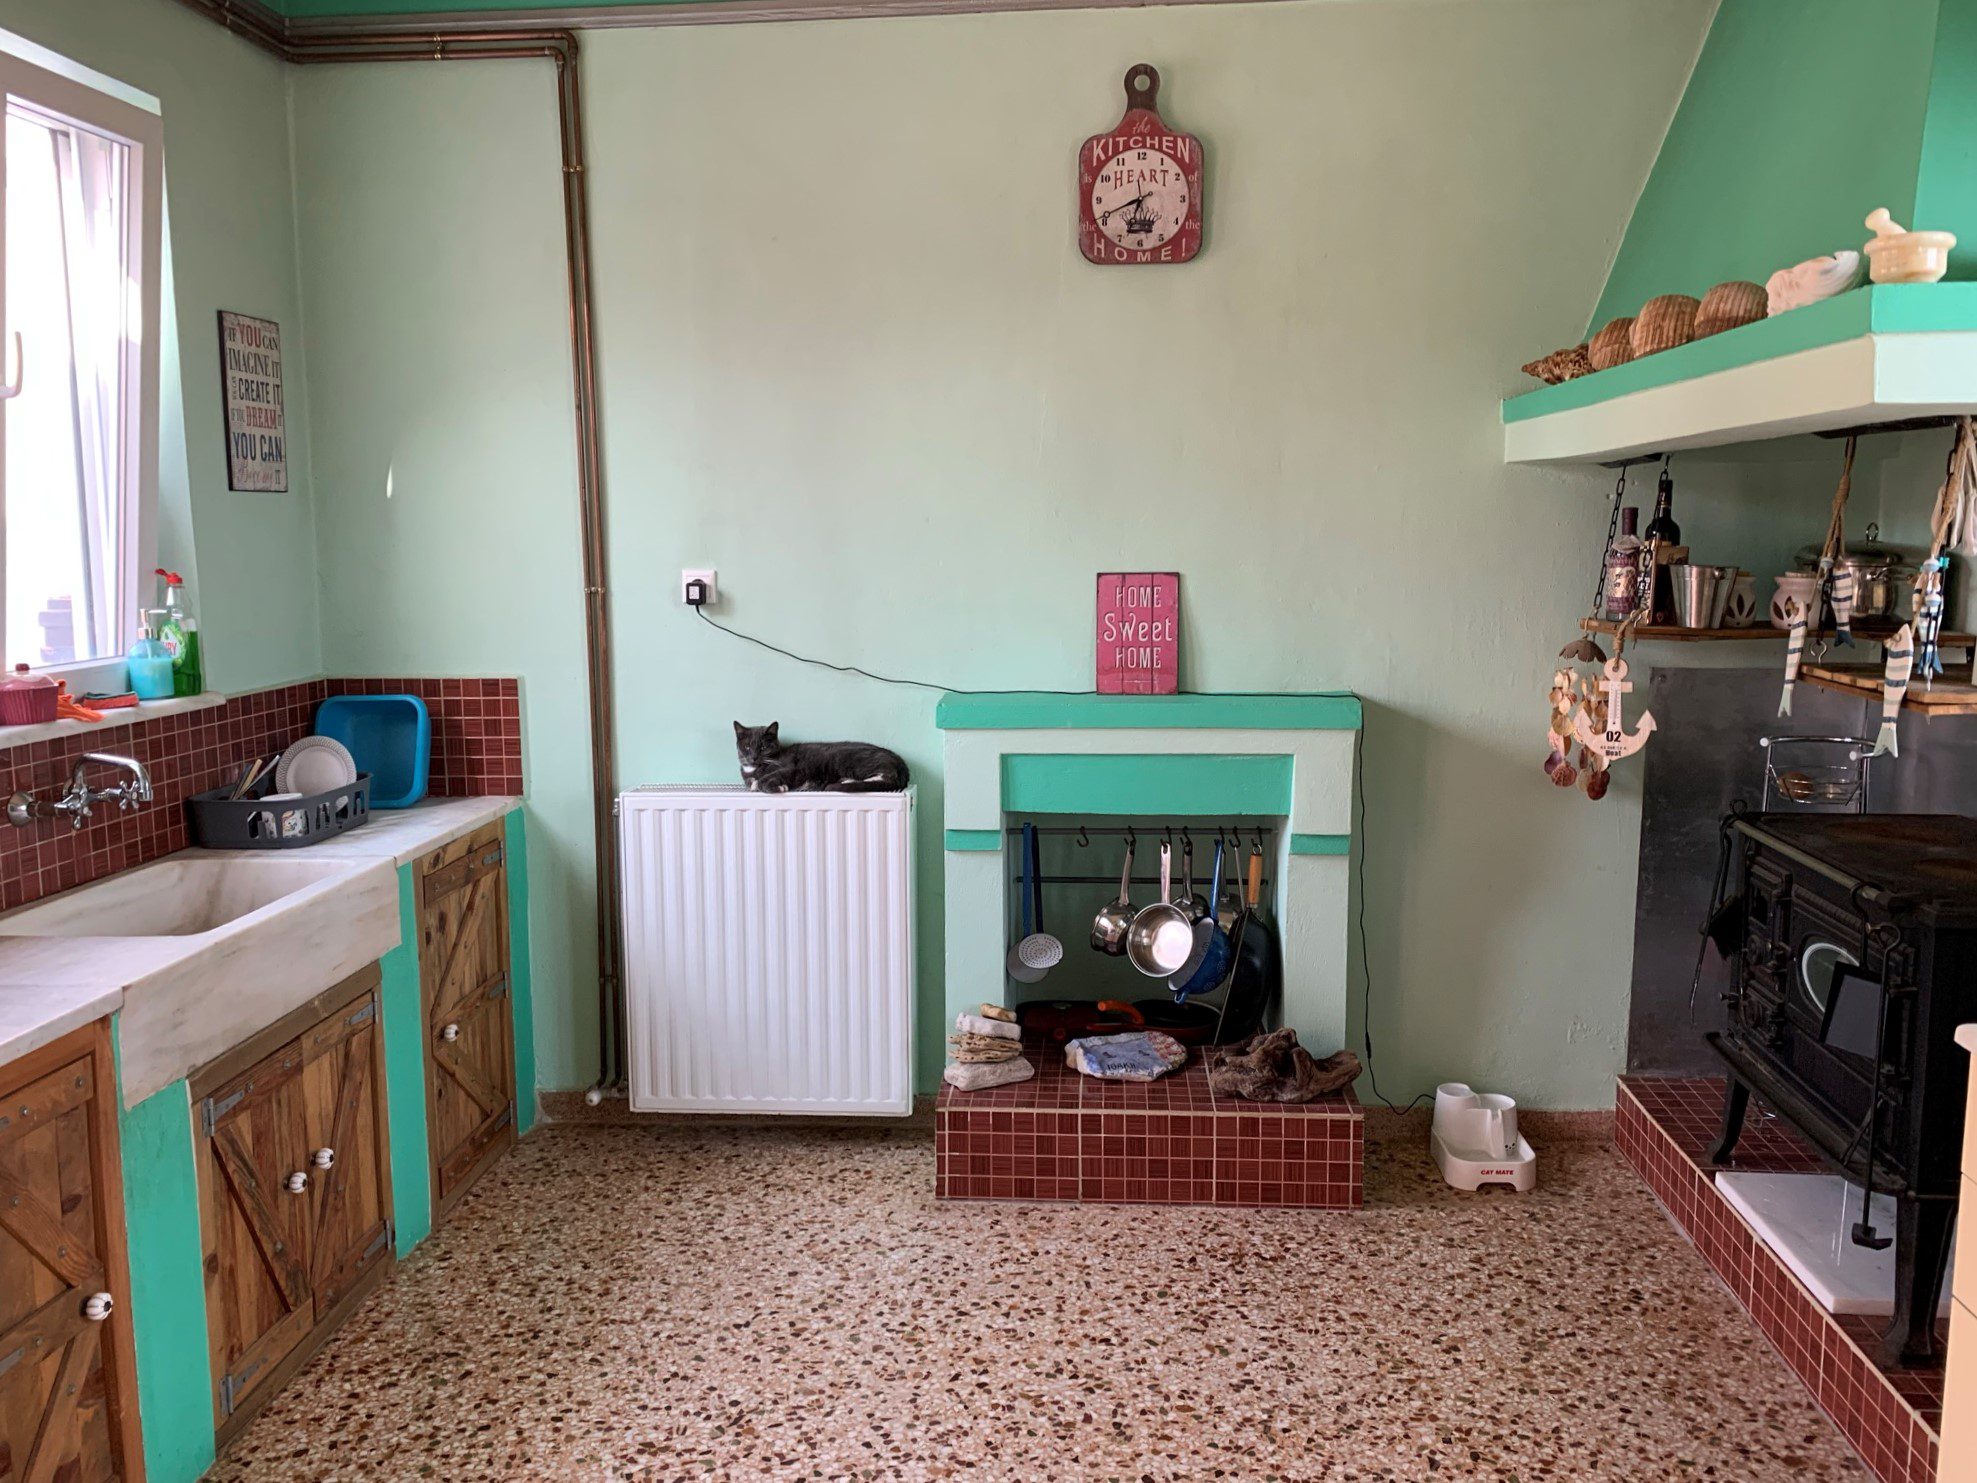 Kitchen of house for sale in Ithaca Greece, Lefki